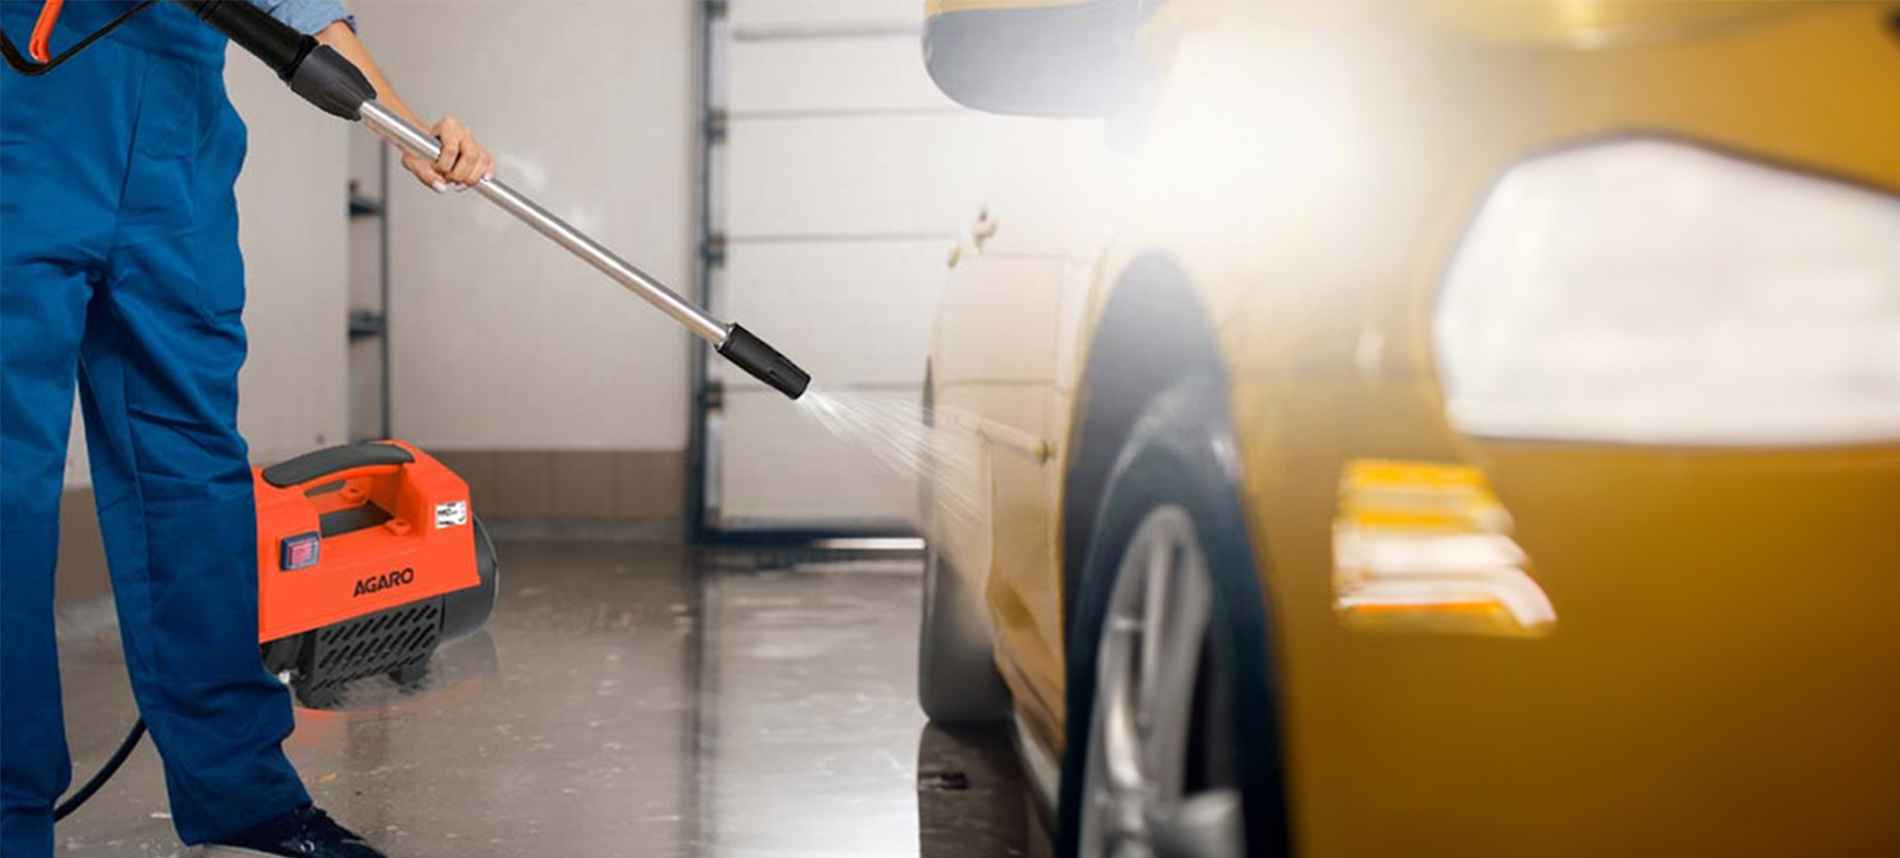 Best Pressure Washer for Cars: How to Choose the Right One – Agaro